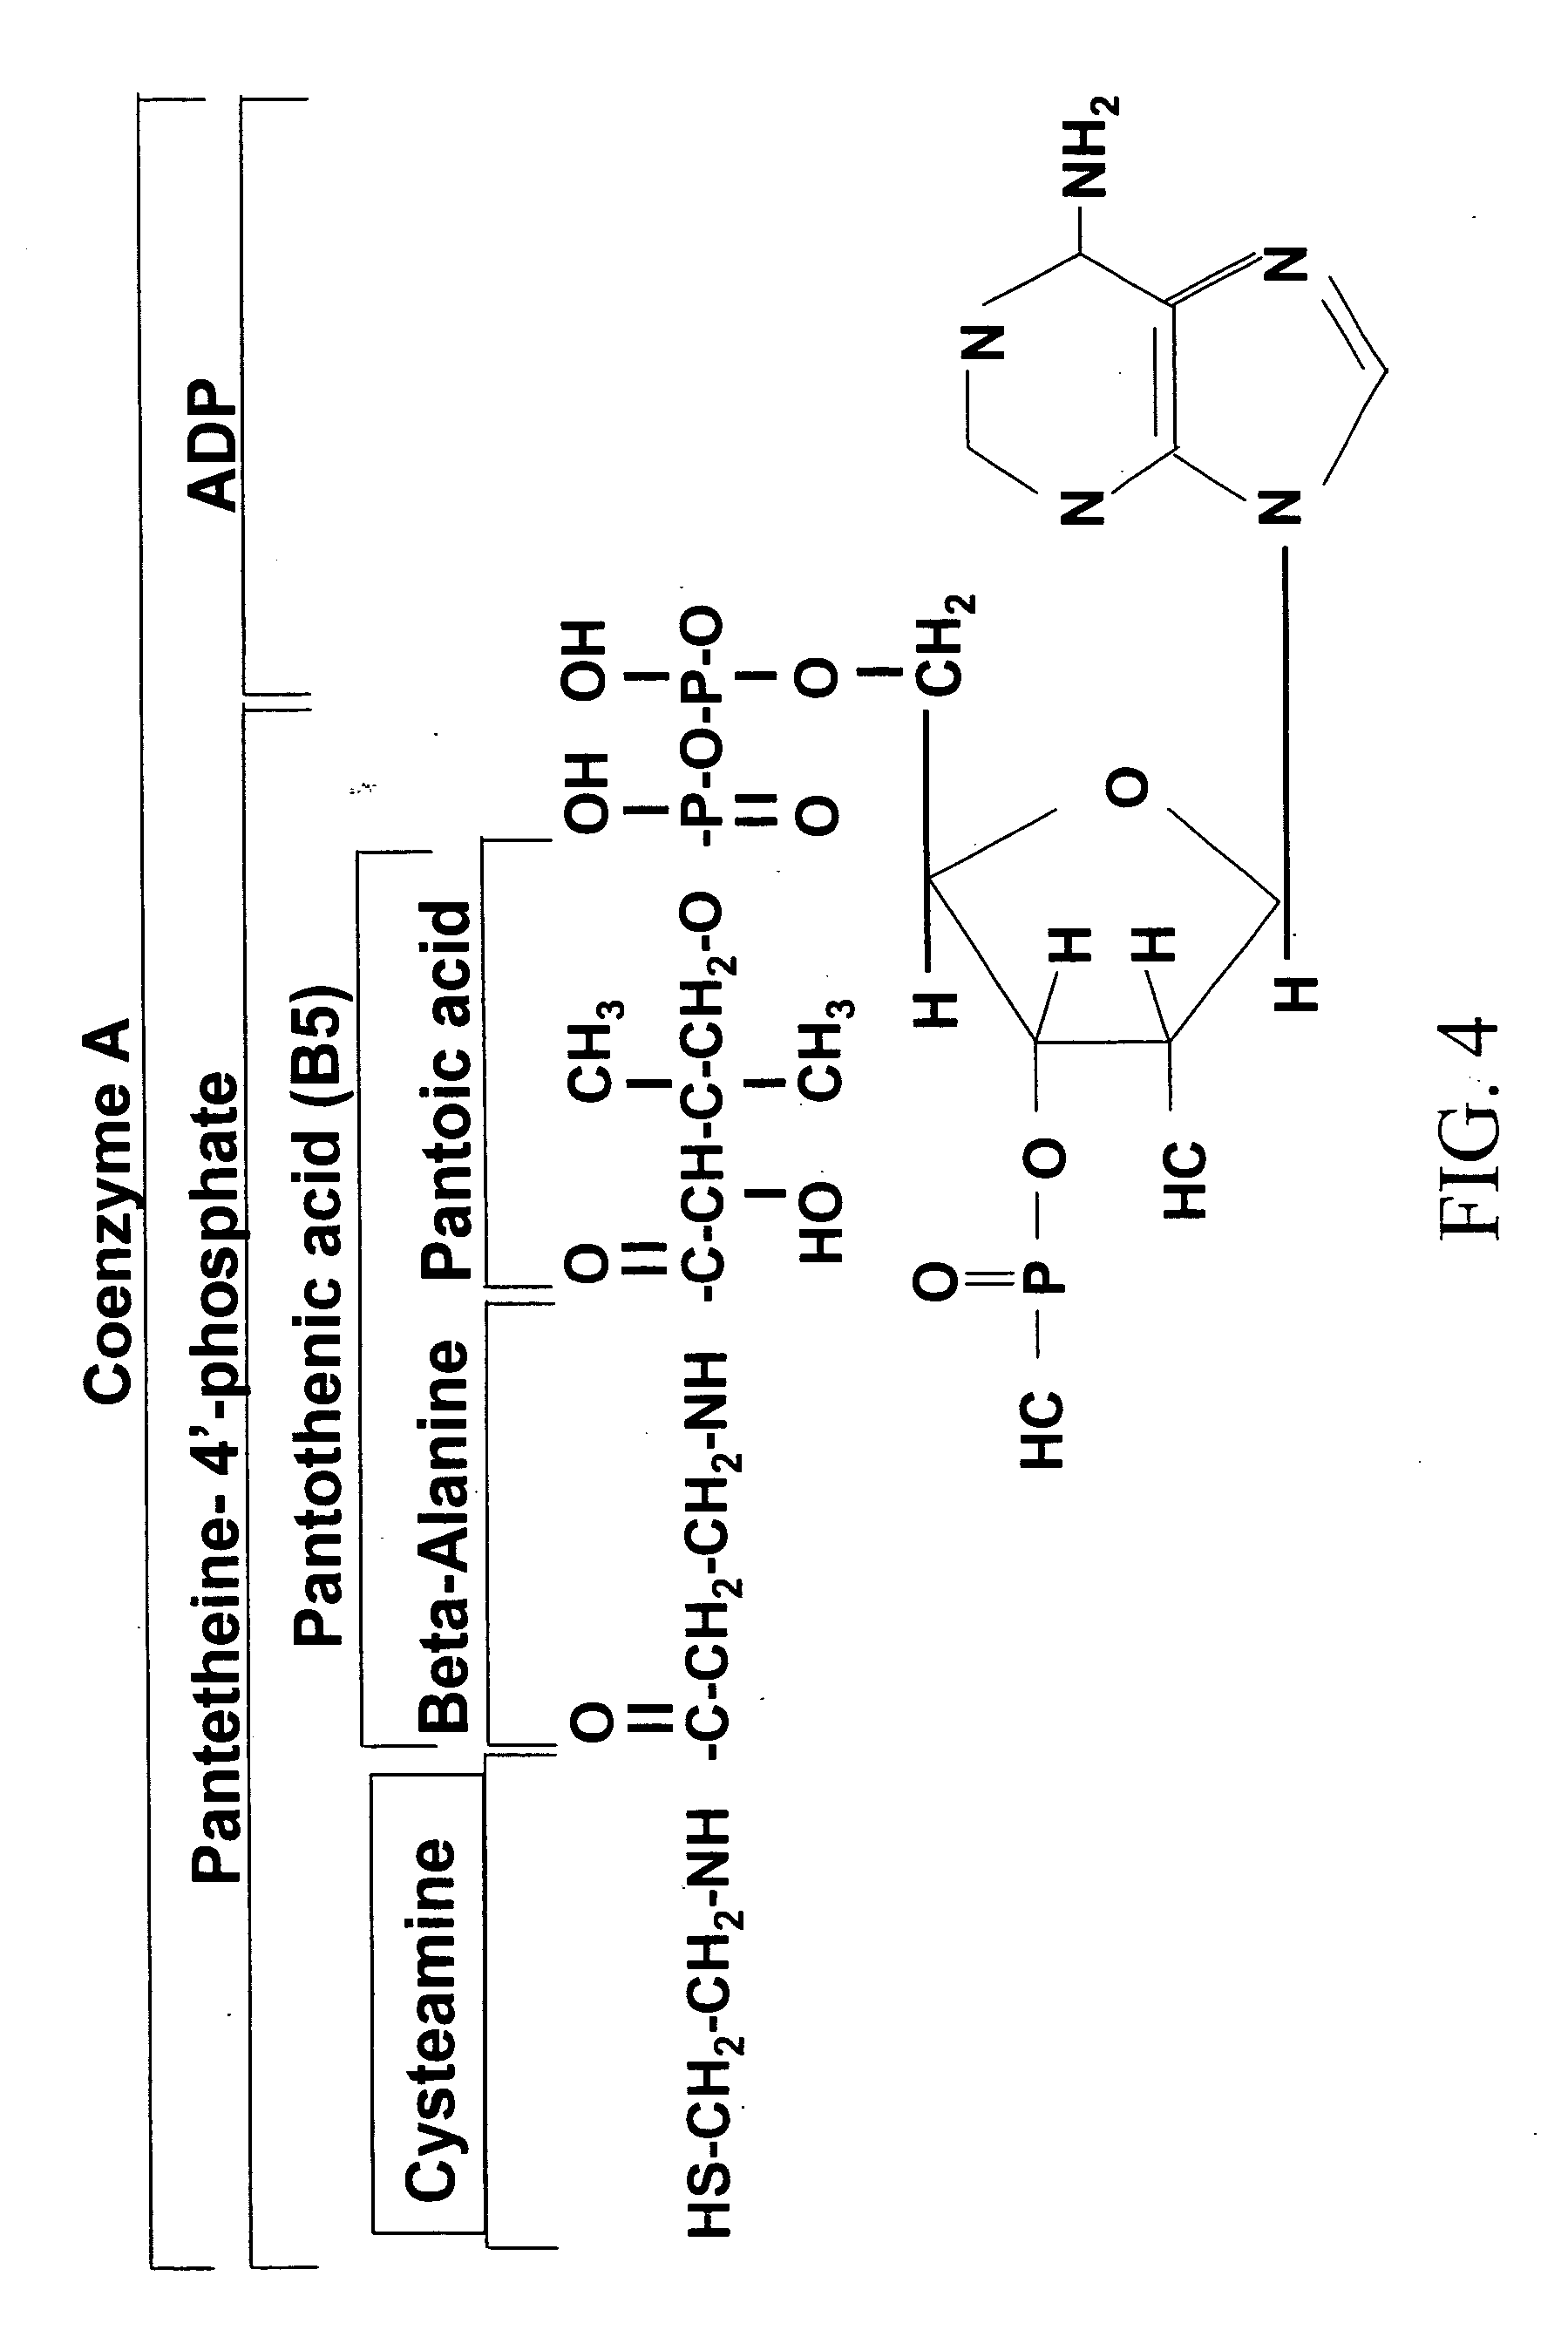 Materials and methods for improving alcohol metabolism and alleviating the effects of hangovers